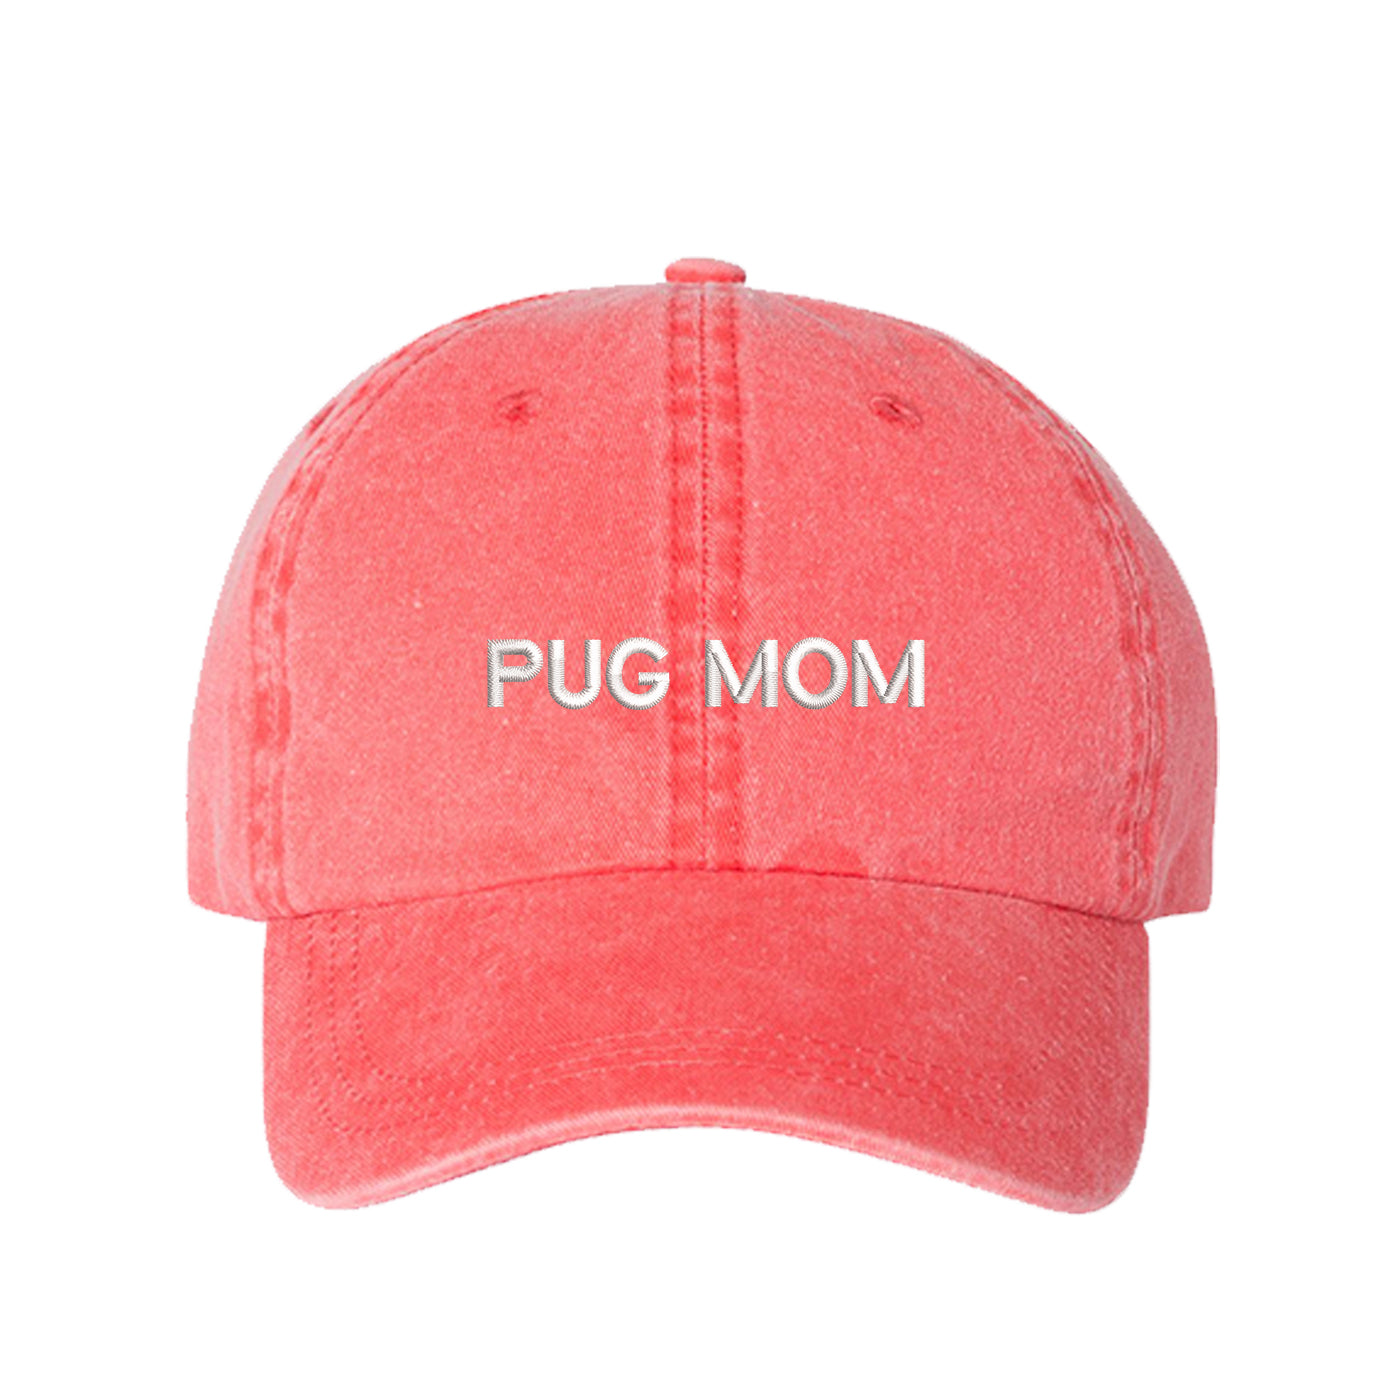 Pug Mom Washed Baseball Hat, Pug Mom Dad Hat, Dog Parent Hats, Embroidered Dad hat, Animal Lover Gifts, Pug Mother, Mothers Day Gift, Pug Mama, DSY Lifestyle Dad Hats, Coral Washed Baseball Hat